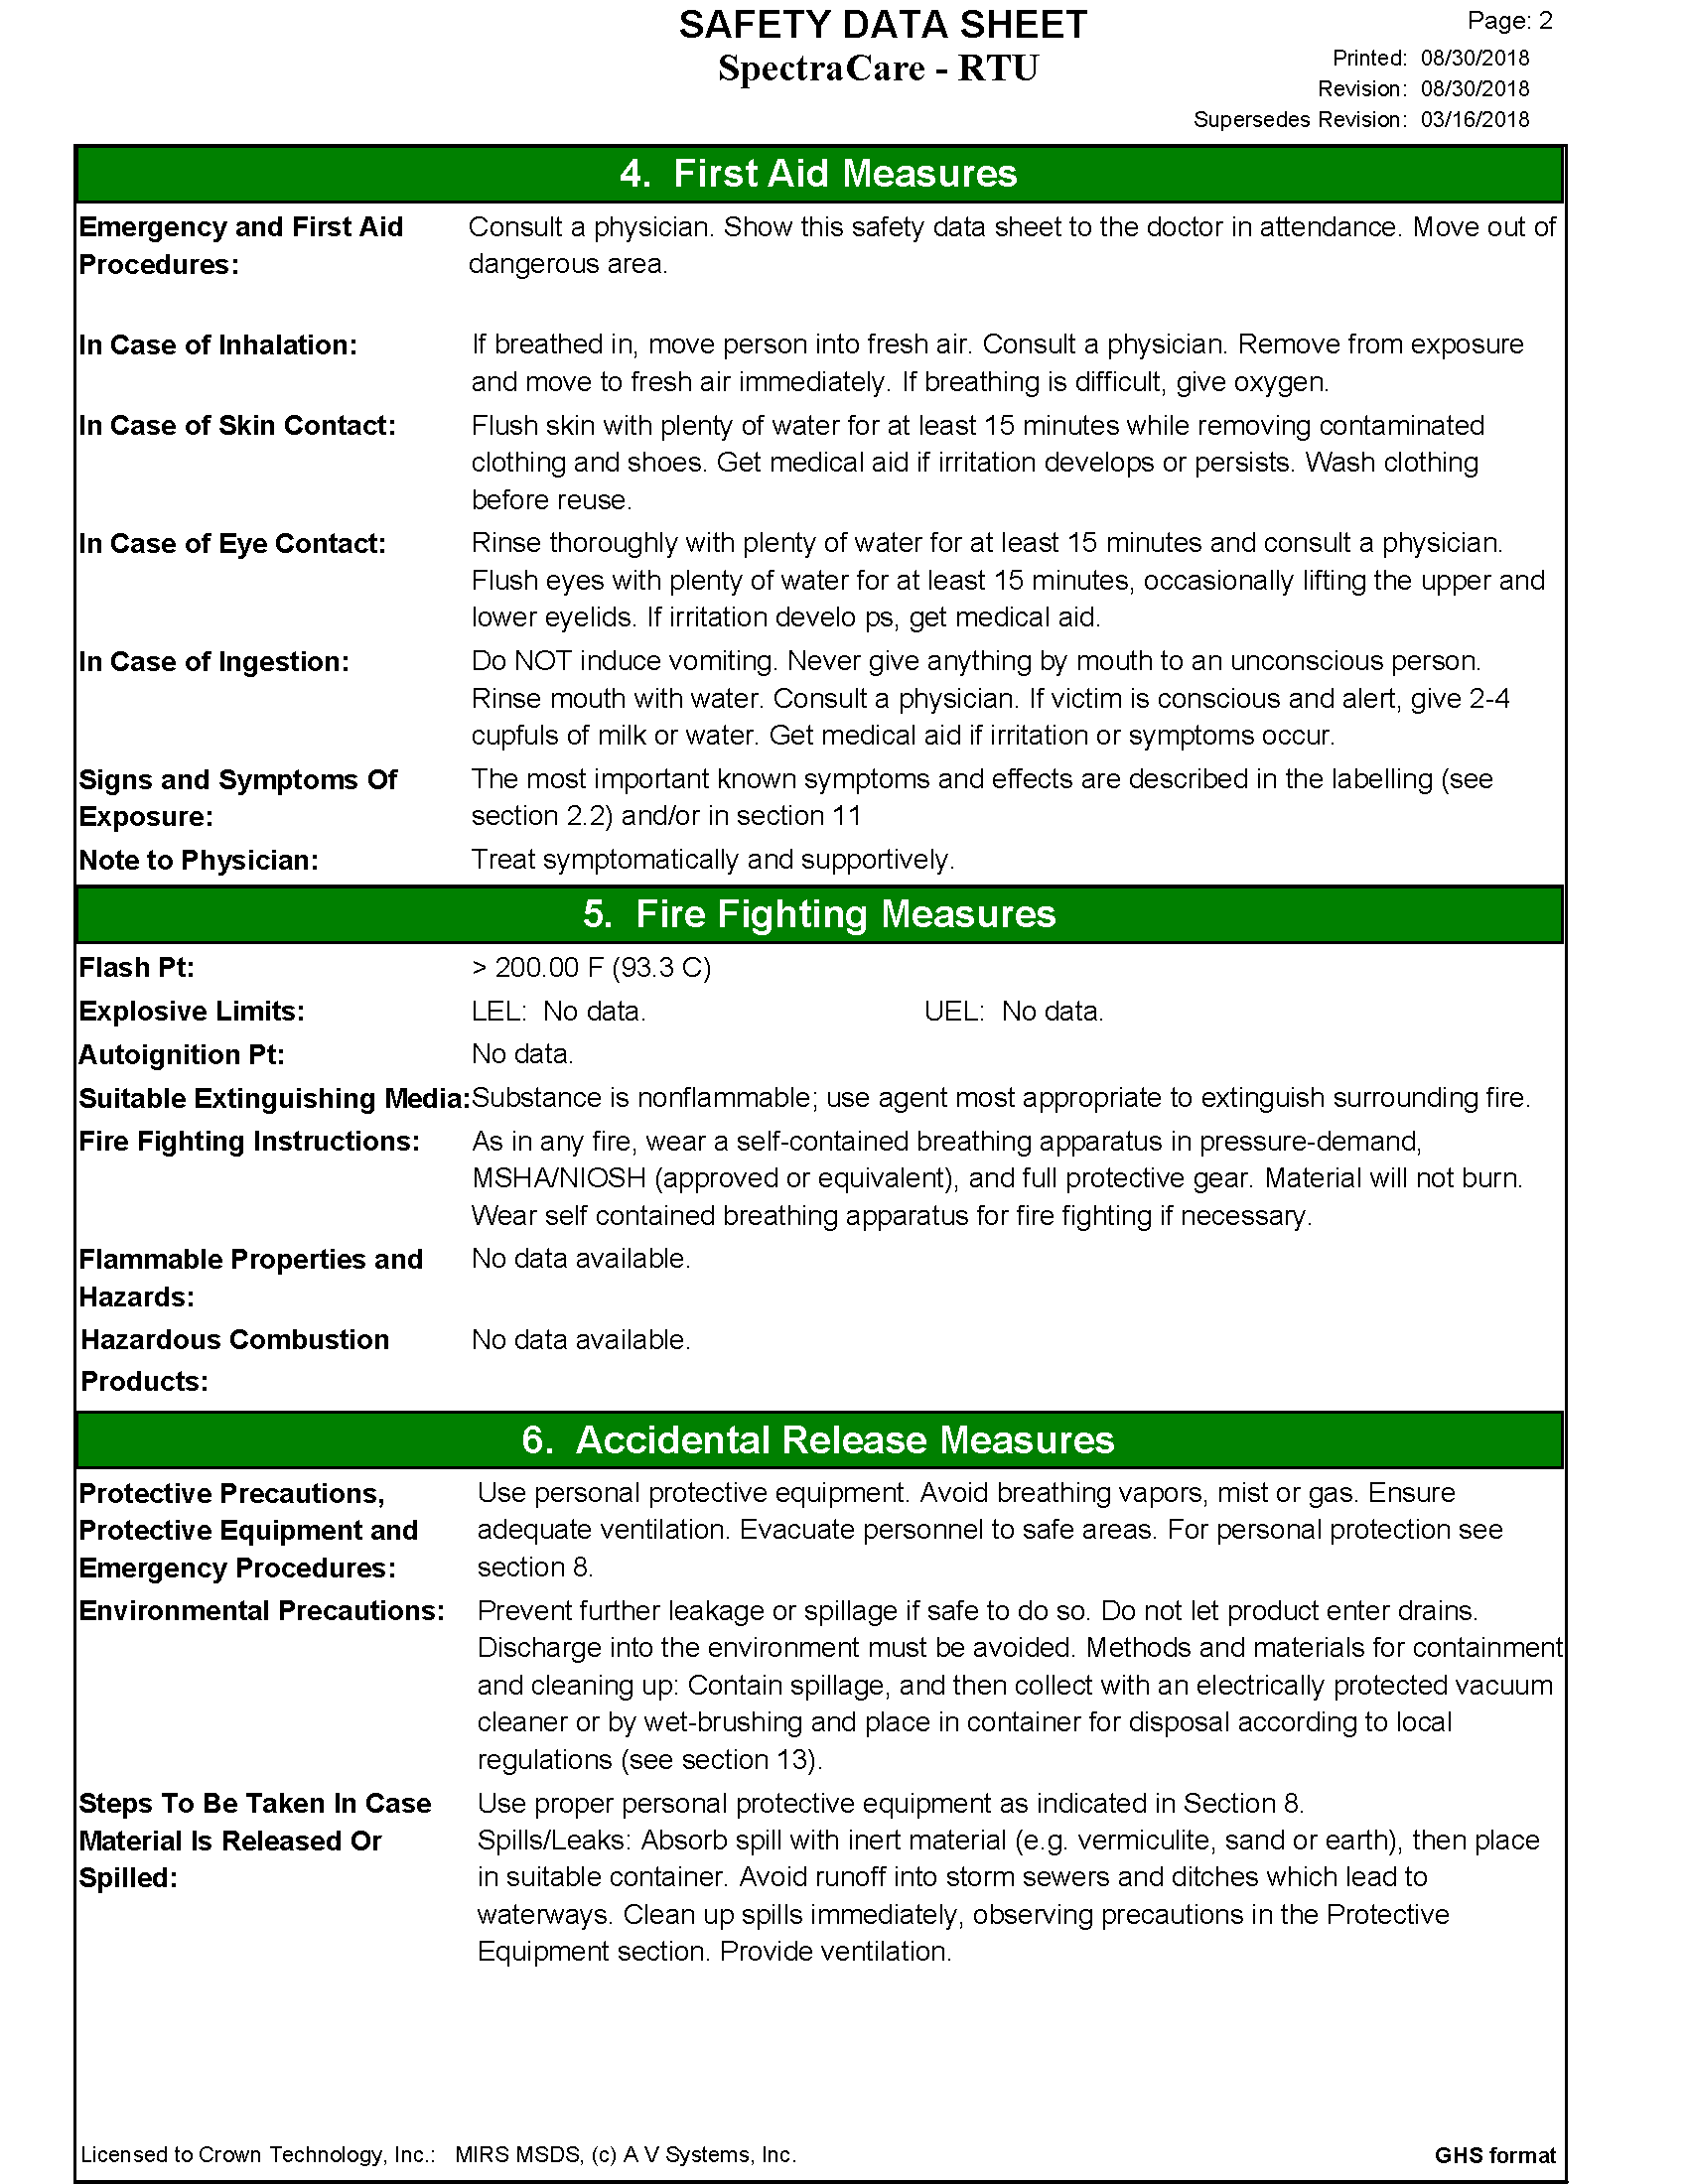 SpectraCare RTU_SDS-Full_Page_2